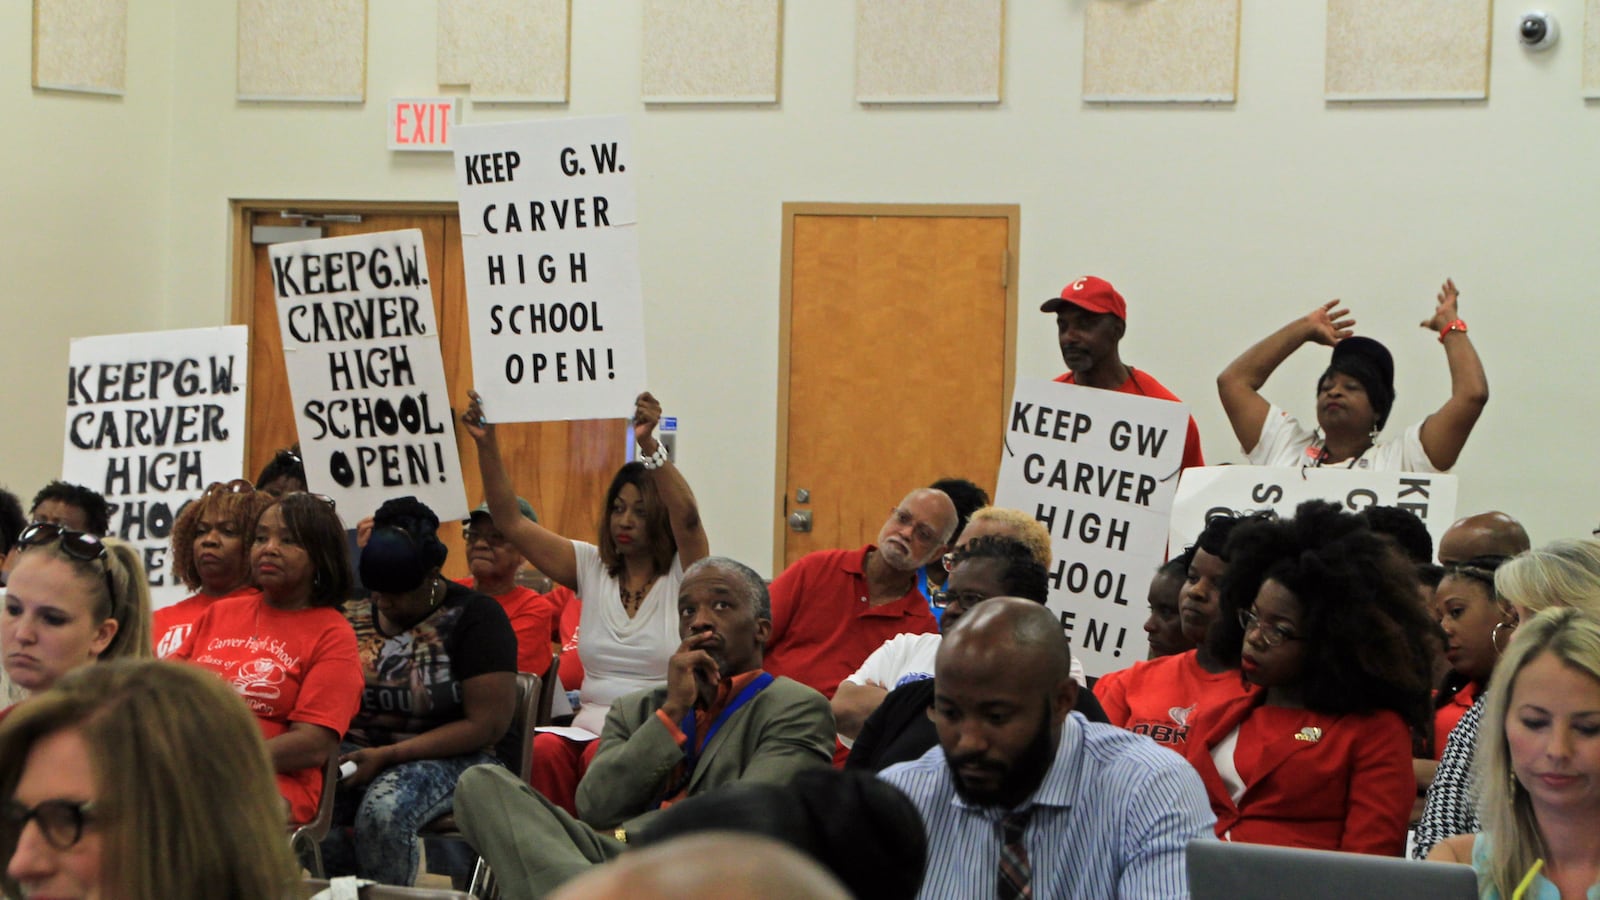 Proponents of keeping Carver High School open show their support during a school board meeting last spring. The school was closed a few months later.